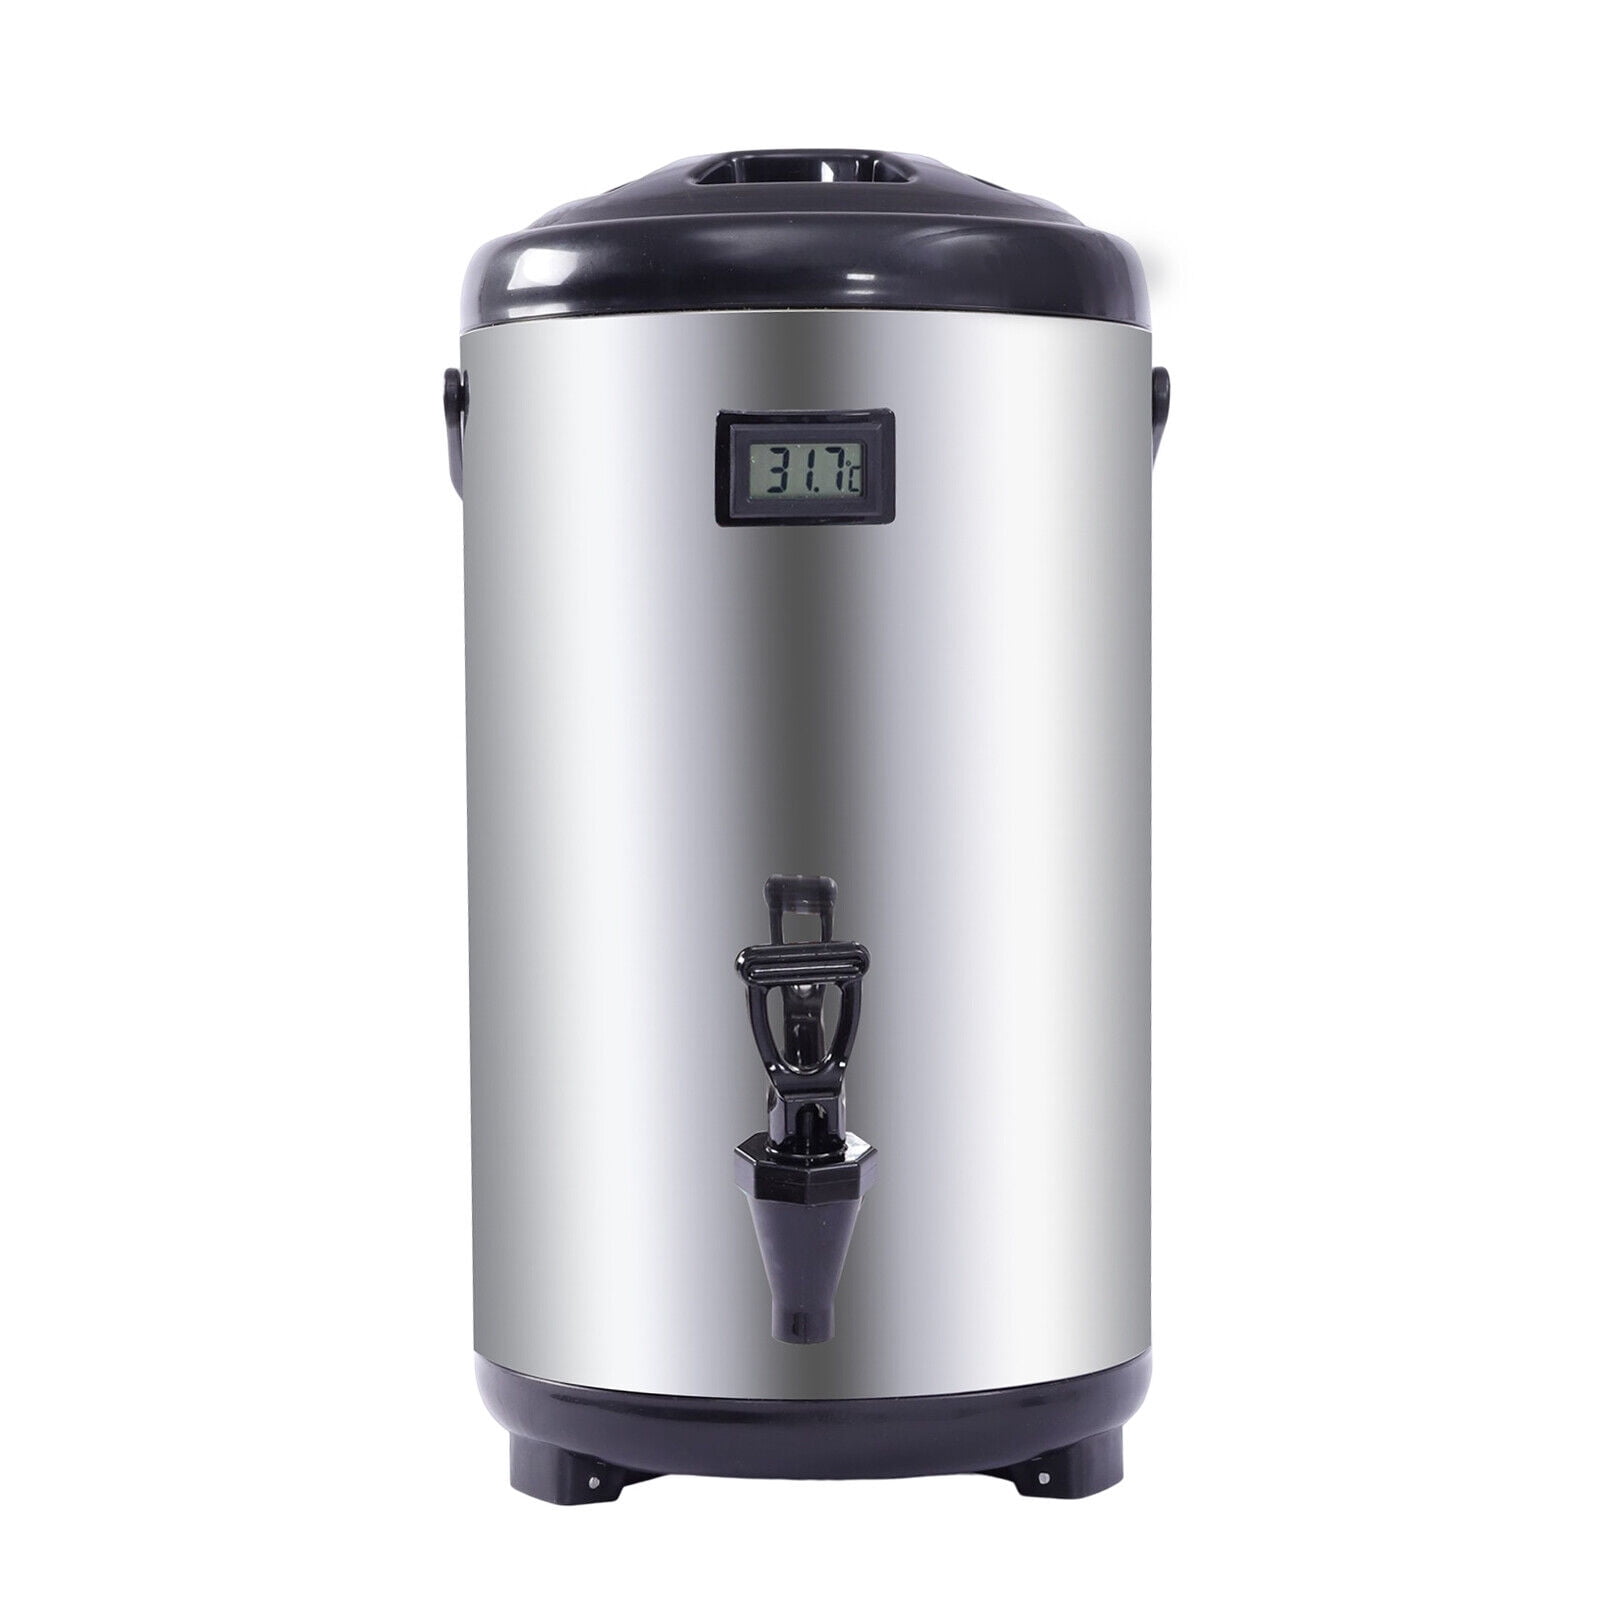 Denest 12L Electric Commercial Coffee Juice Urn Brewer Warmer Heating Cold Dispenser, Size: 28*28*50cm/11*11*19.7 inch, Silver